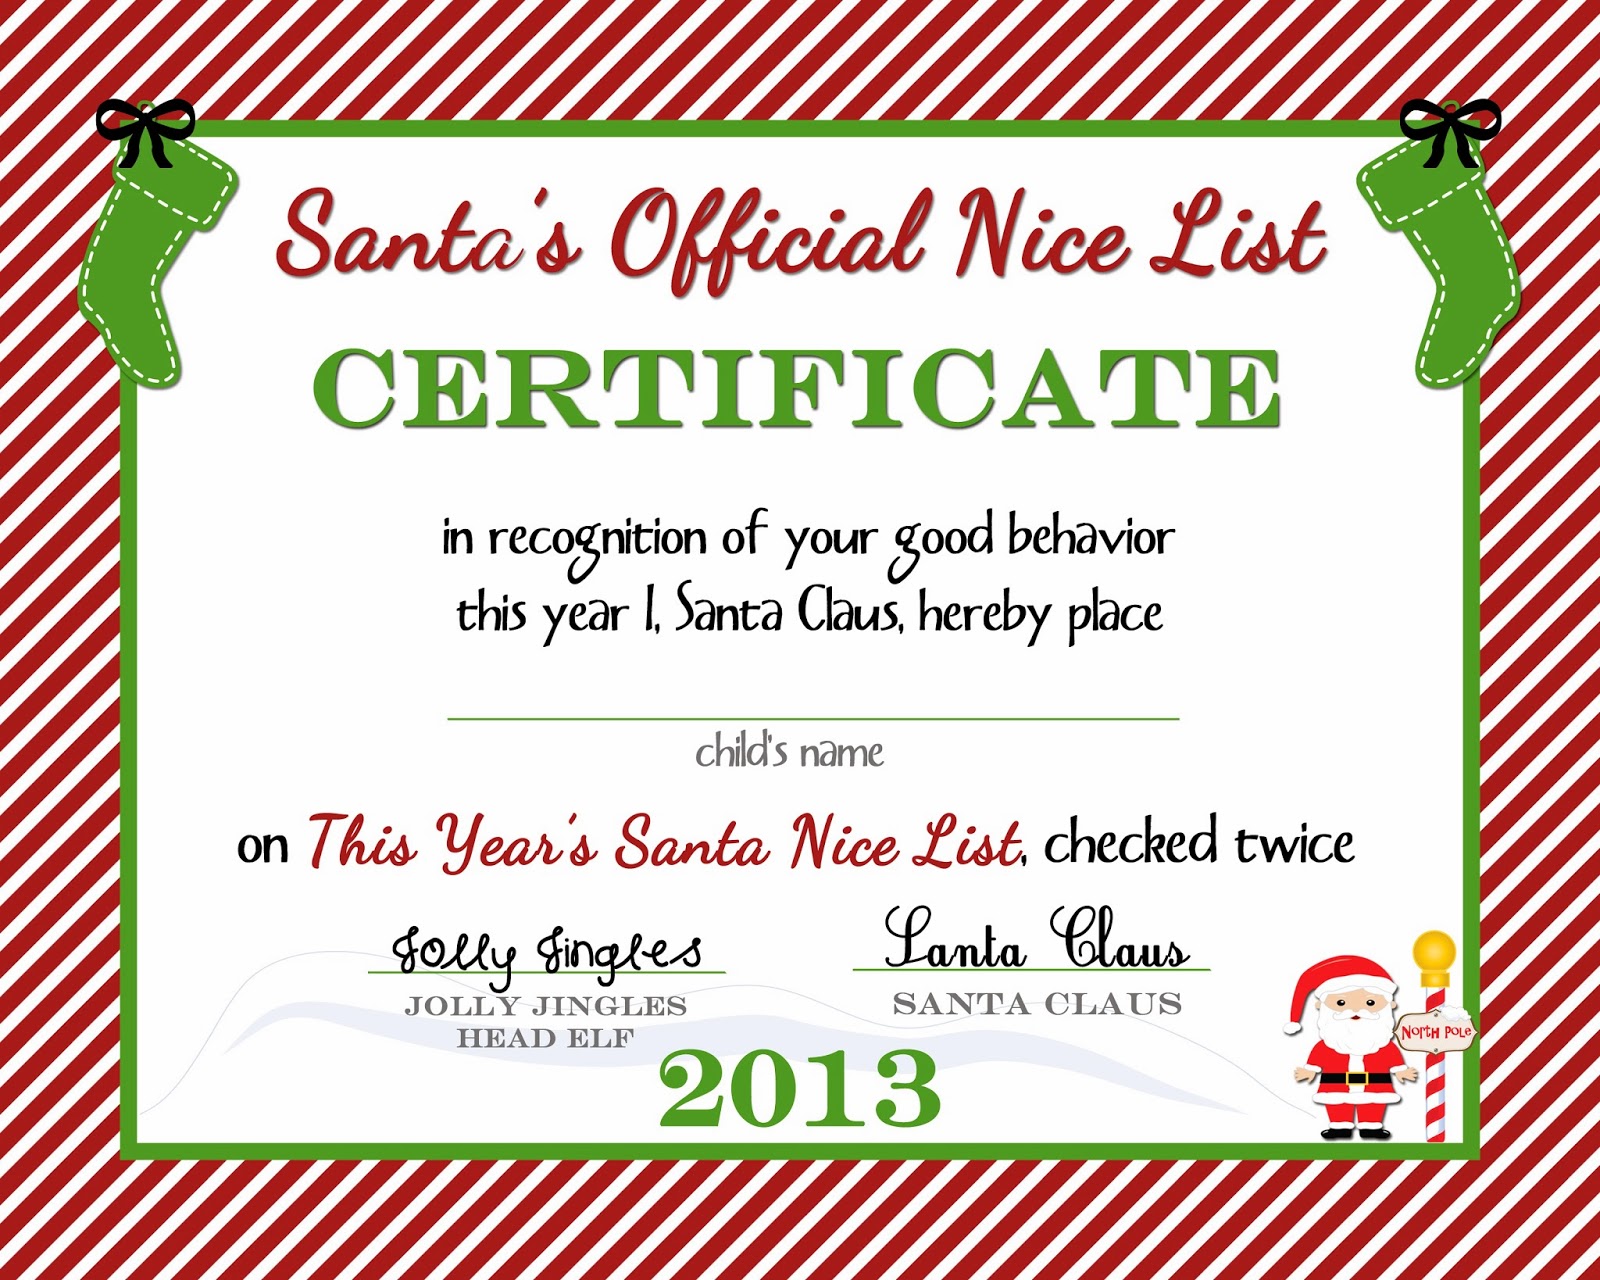  Free Printable Nice List Certificate From The North Pole A Delicate 